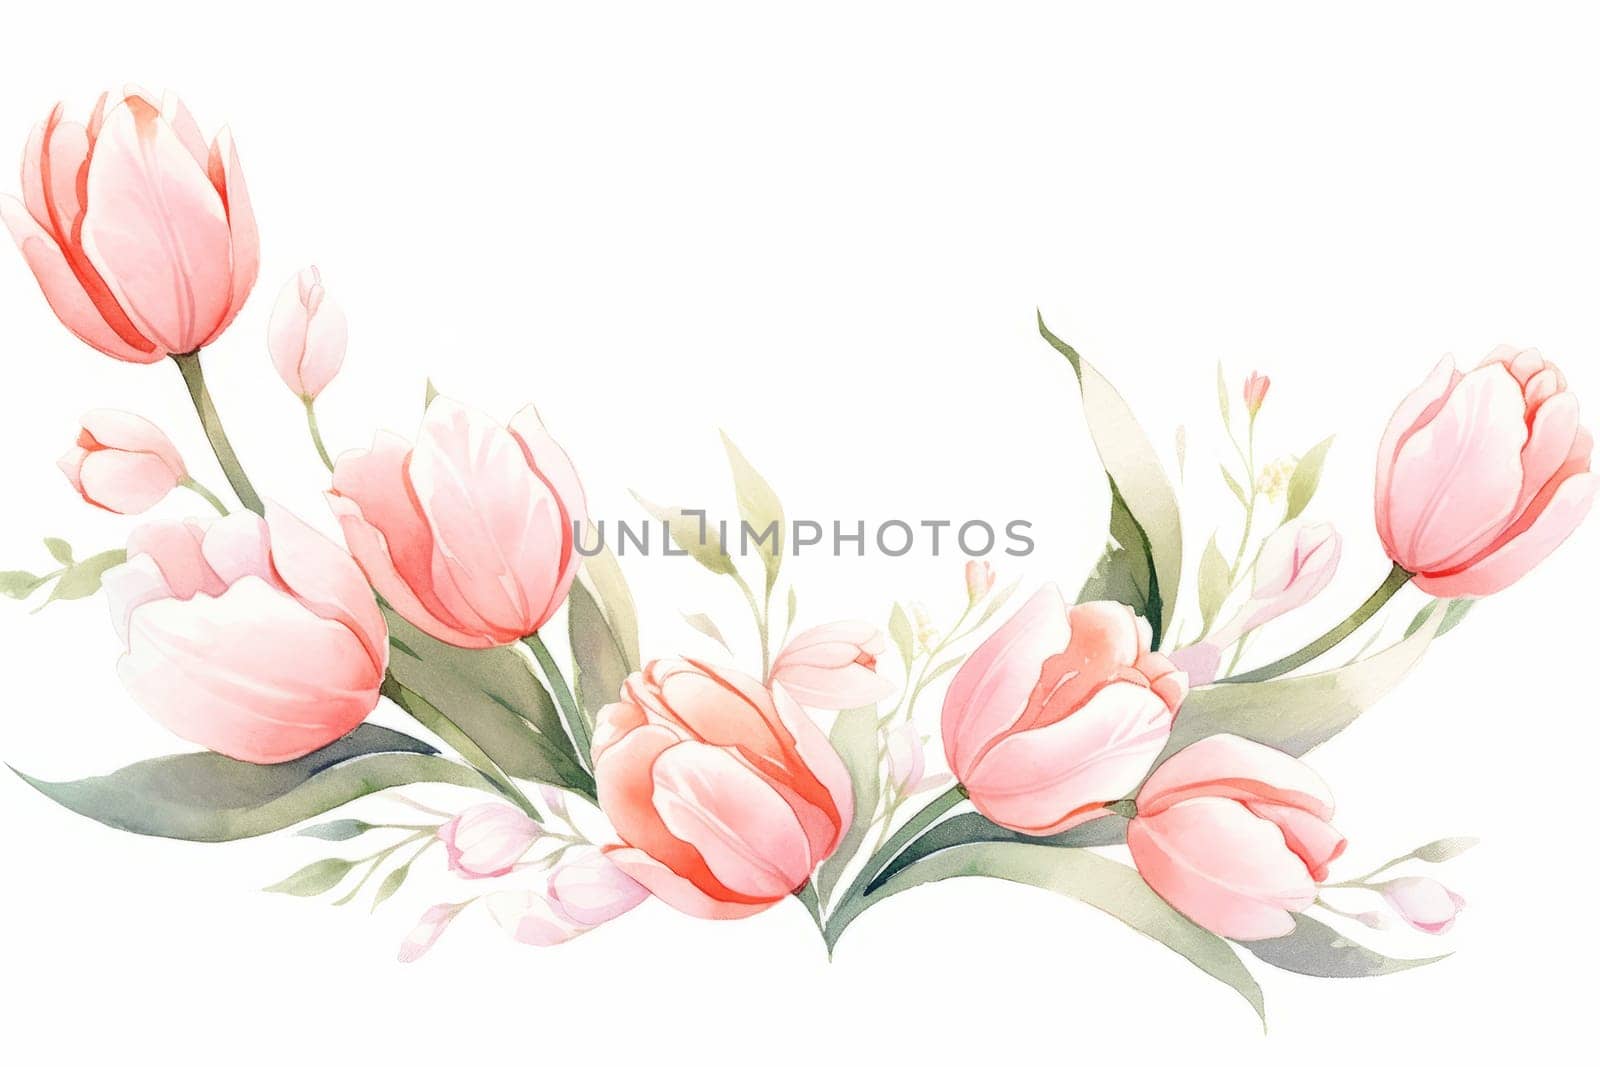 Tulips flower hand painted watercolor illustration